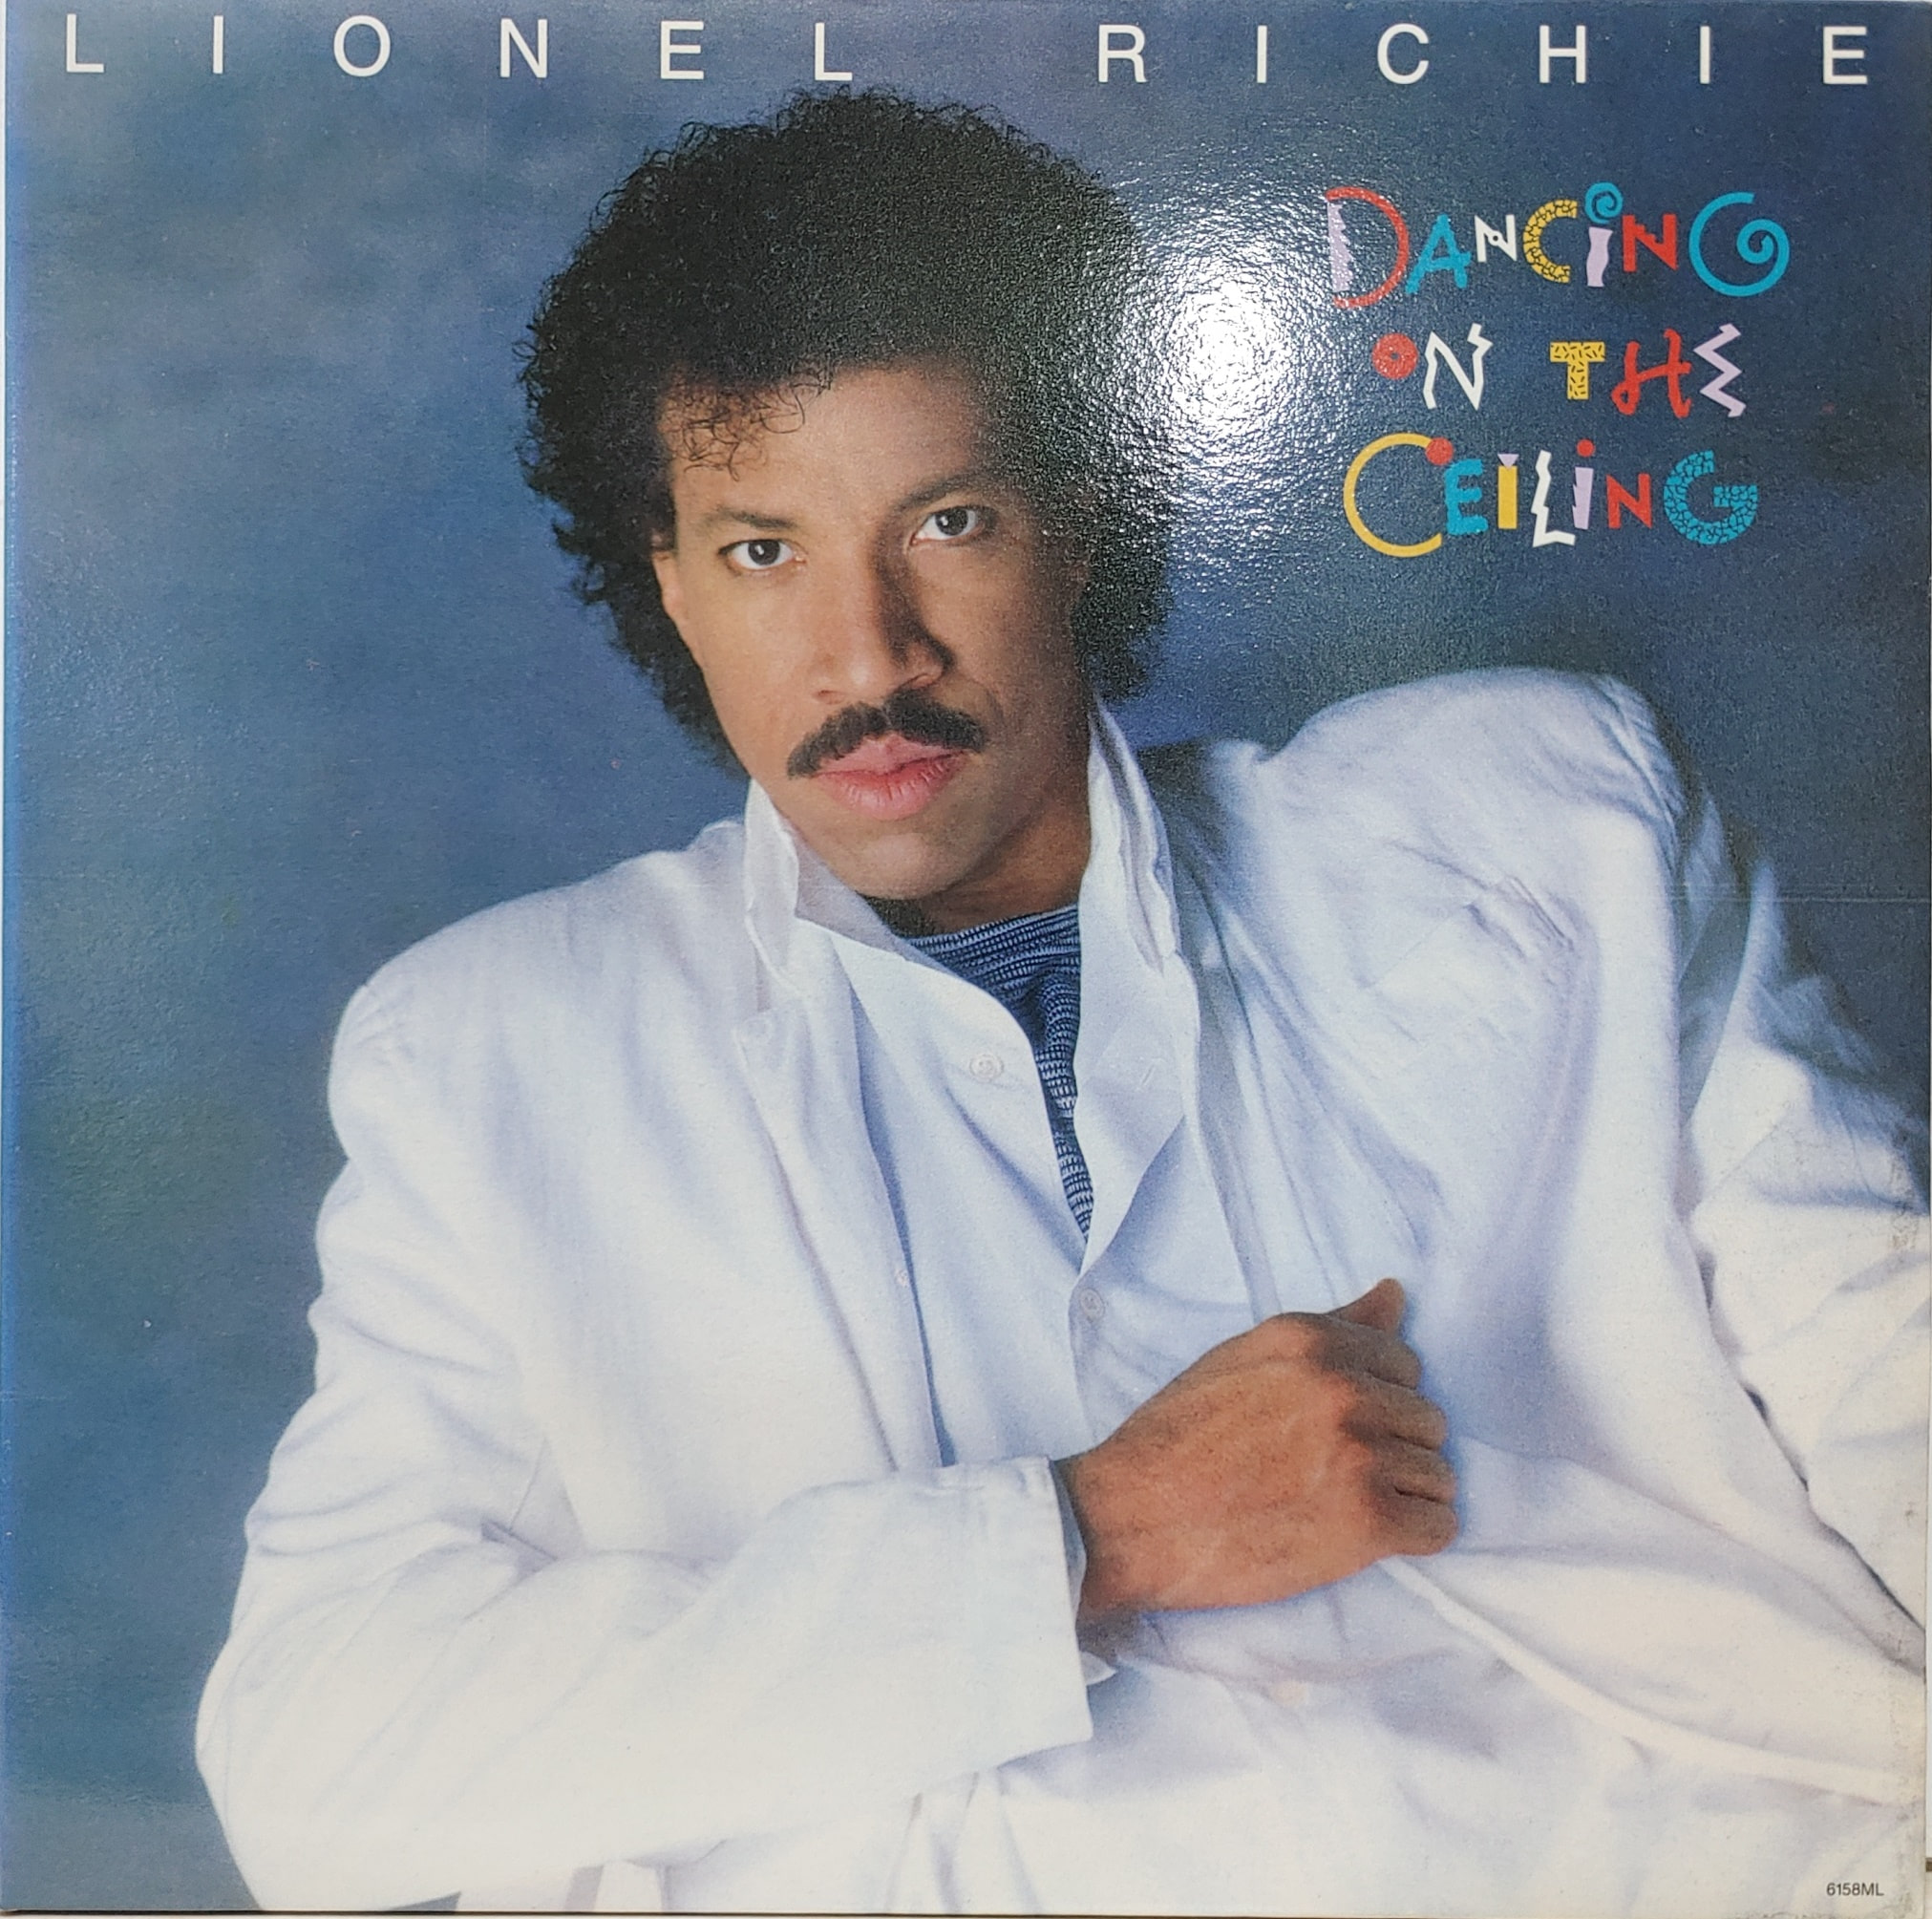 LIONEL RICHIE / DANCING ON THE CEILING